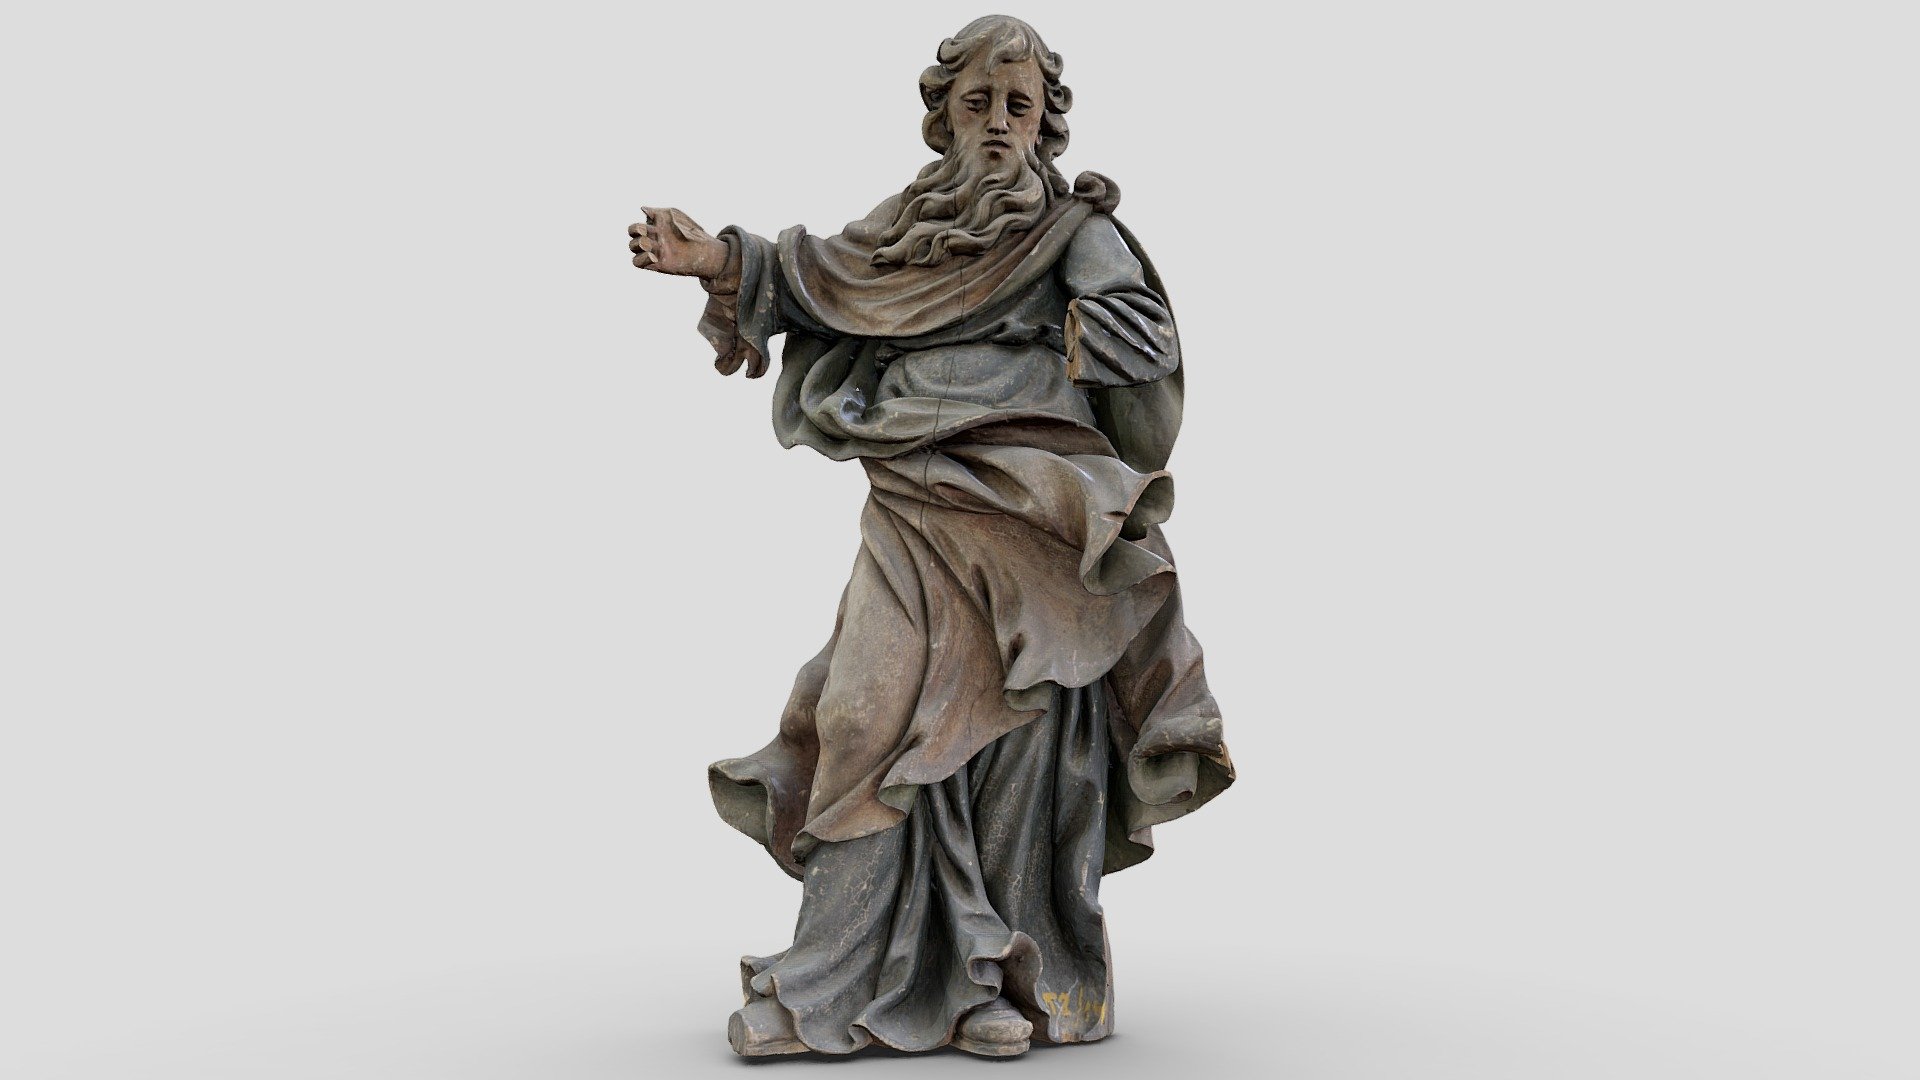 The figure of the prophet is represented in a dynamic pose with his arms theatrically outstretched. His head is lowered; the gaze is directed downwards. The artist skillfully carved the arched eyebrows, almond-shaped eyes, straight nose with flared nostrils, open mouth, as well as hair that smoothly frames the man's head. The saint's clothes and drapery are covered with folds, which pass from smooth curves to geometriс planes, repeating the outlines of the figure. The sculpture is performed in the form of an S-shaped silhouette (figura serpentinata), which dominated the Baroque sculpture. The right leg of the man is slightly bent at the knee and put forward. The whole work is full of dynamism, which is enhanced by the expressive long strands of the prophet's beard and the drapery that emphasizes the movement 3d model